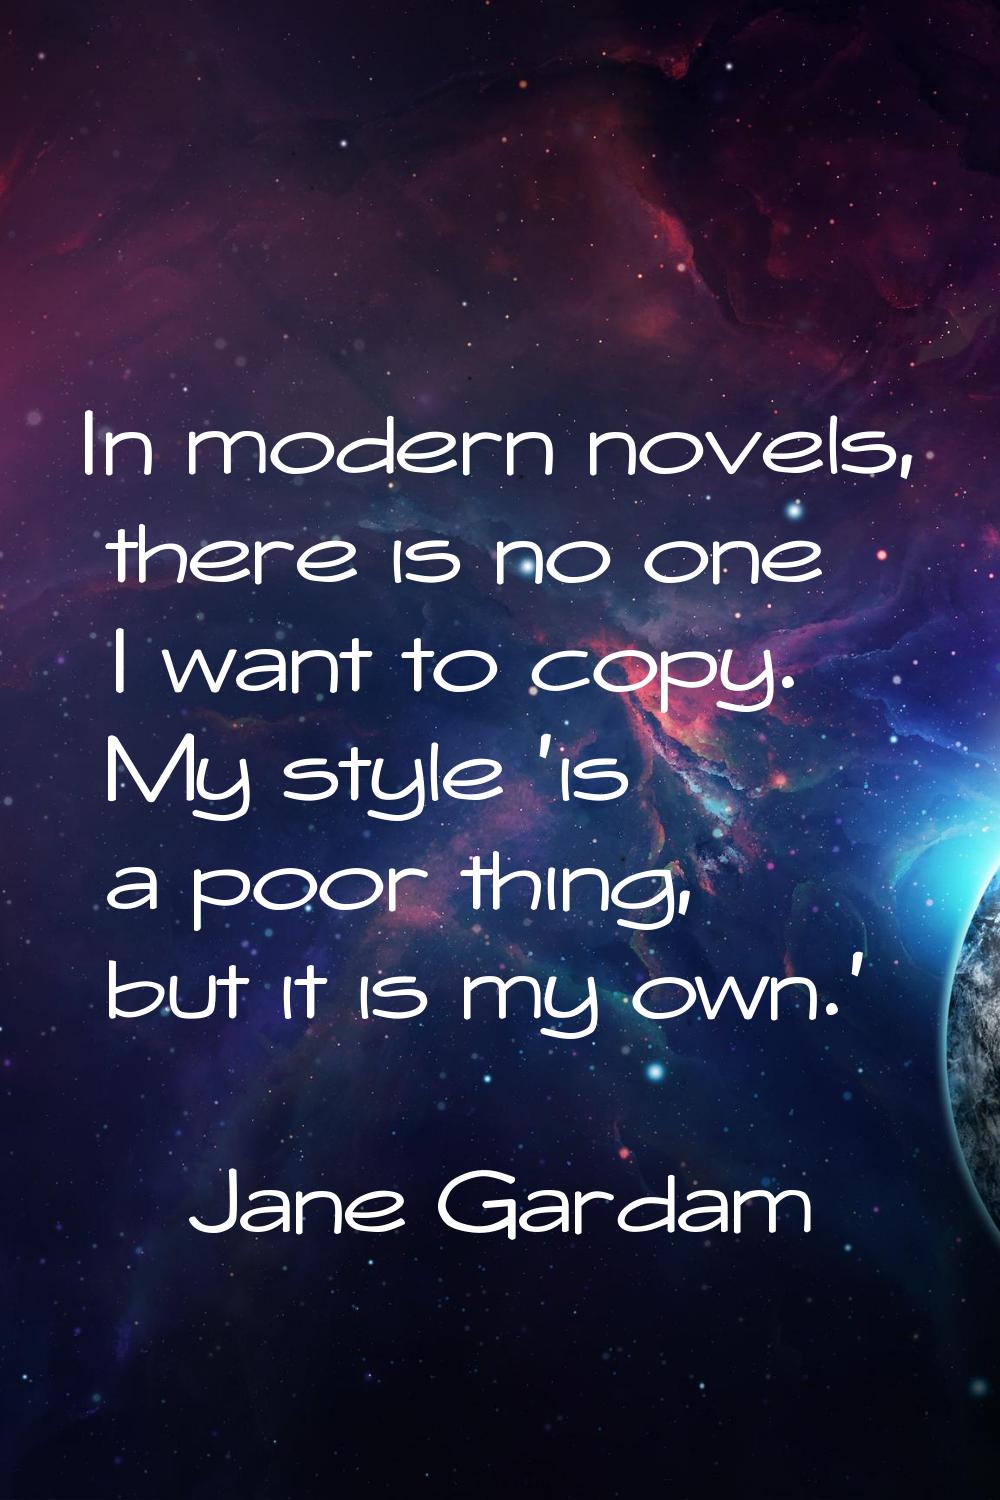 In modern novels, there is no one I want to copy. My style 'is a poor thing, but it is my own.'